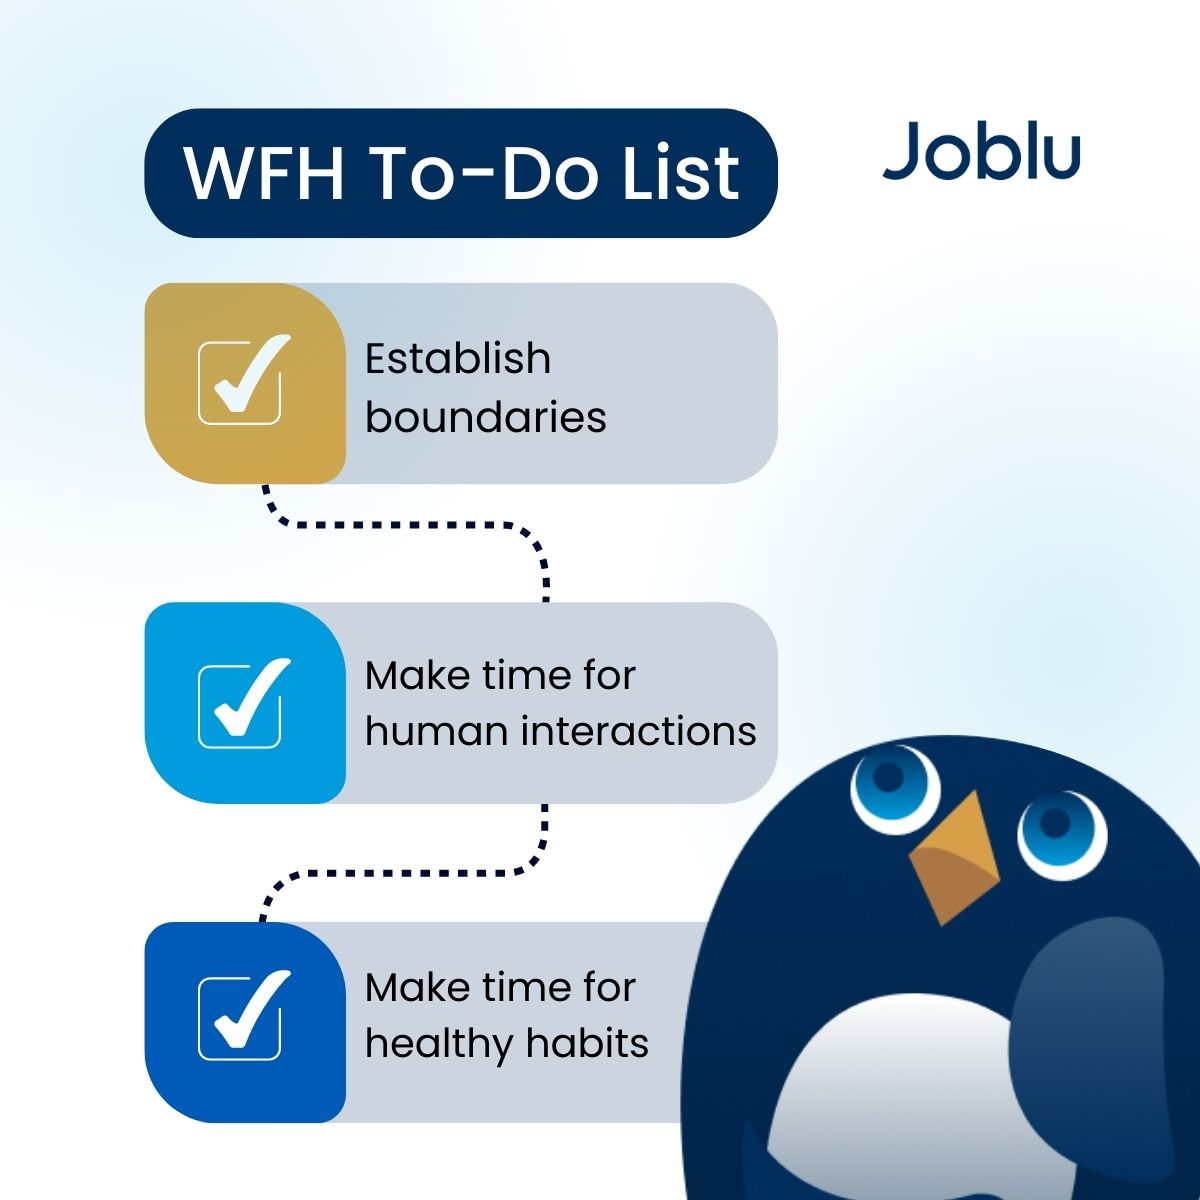 work from home pros and cons: wfh to do list